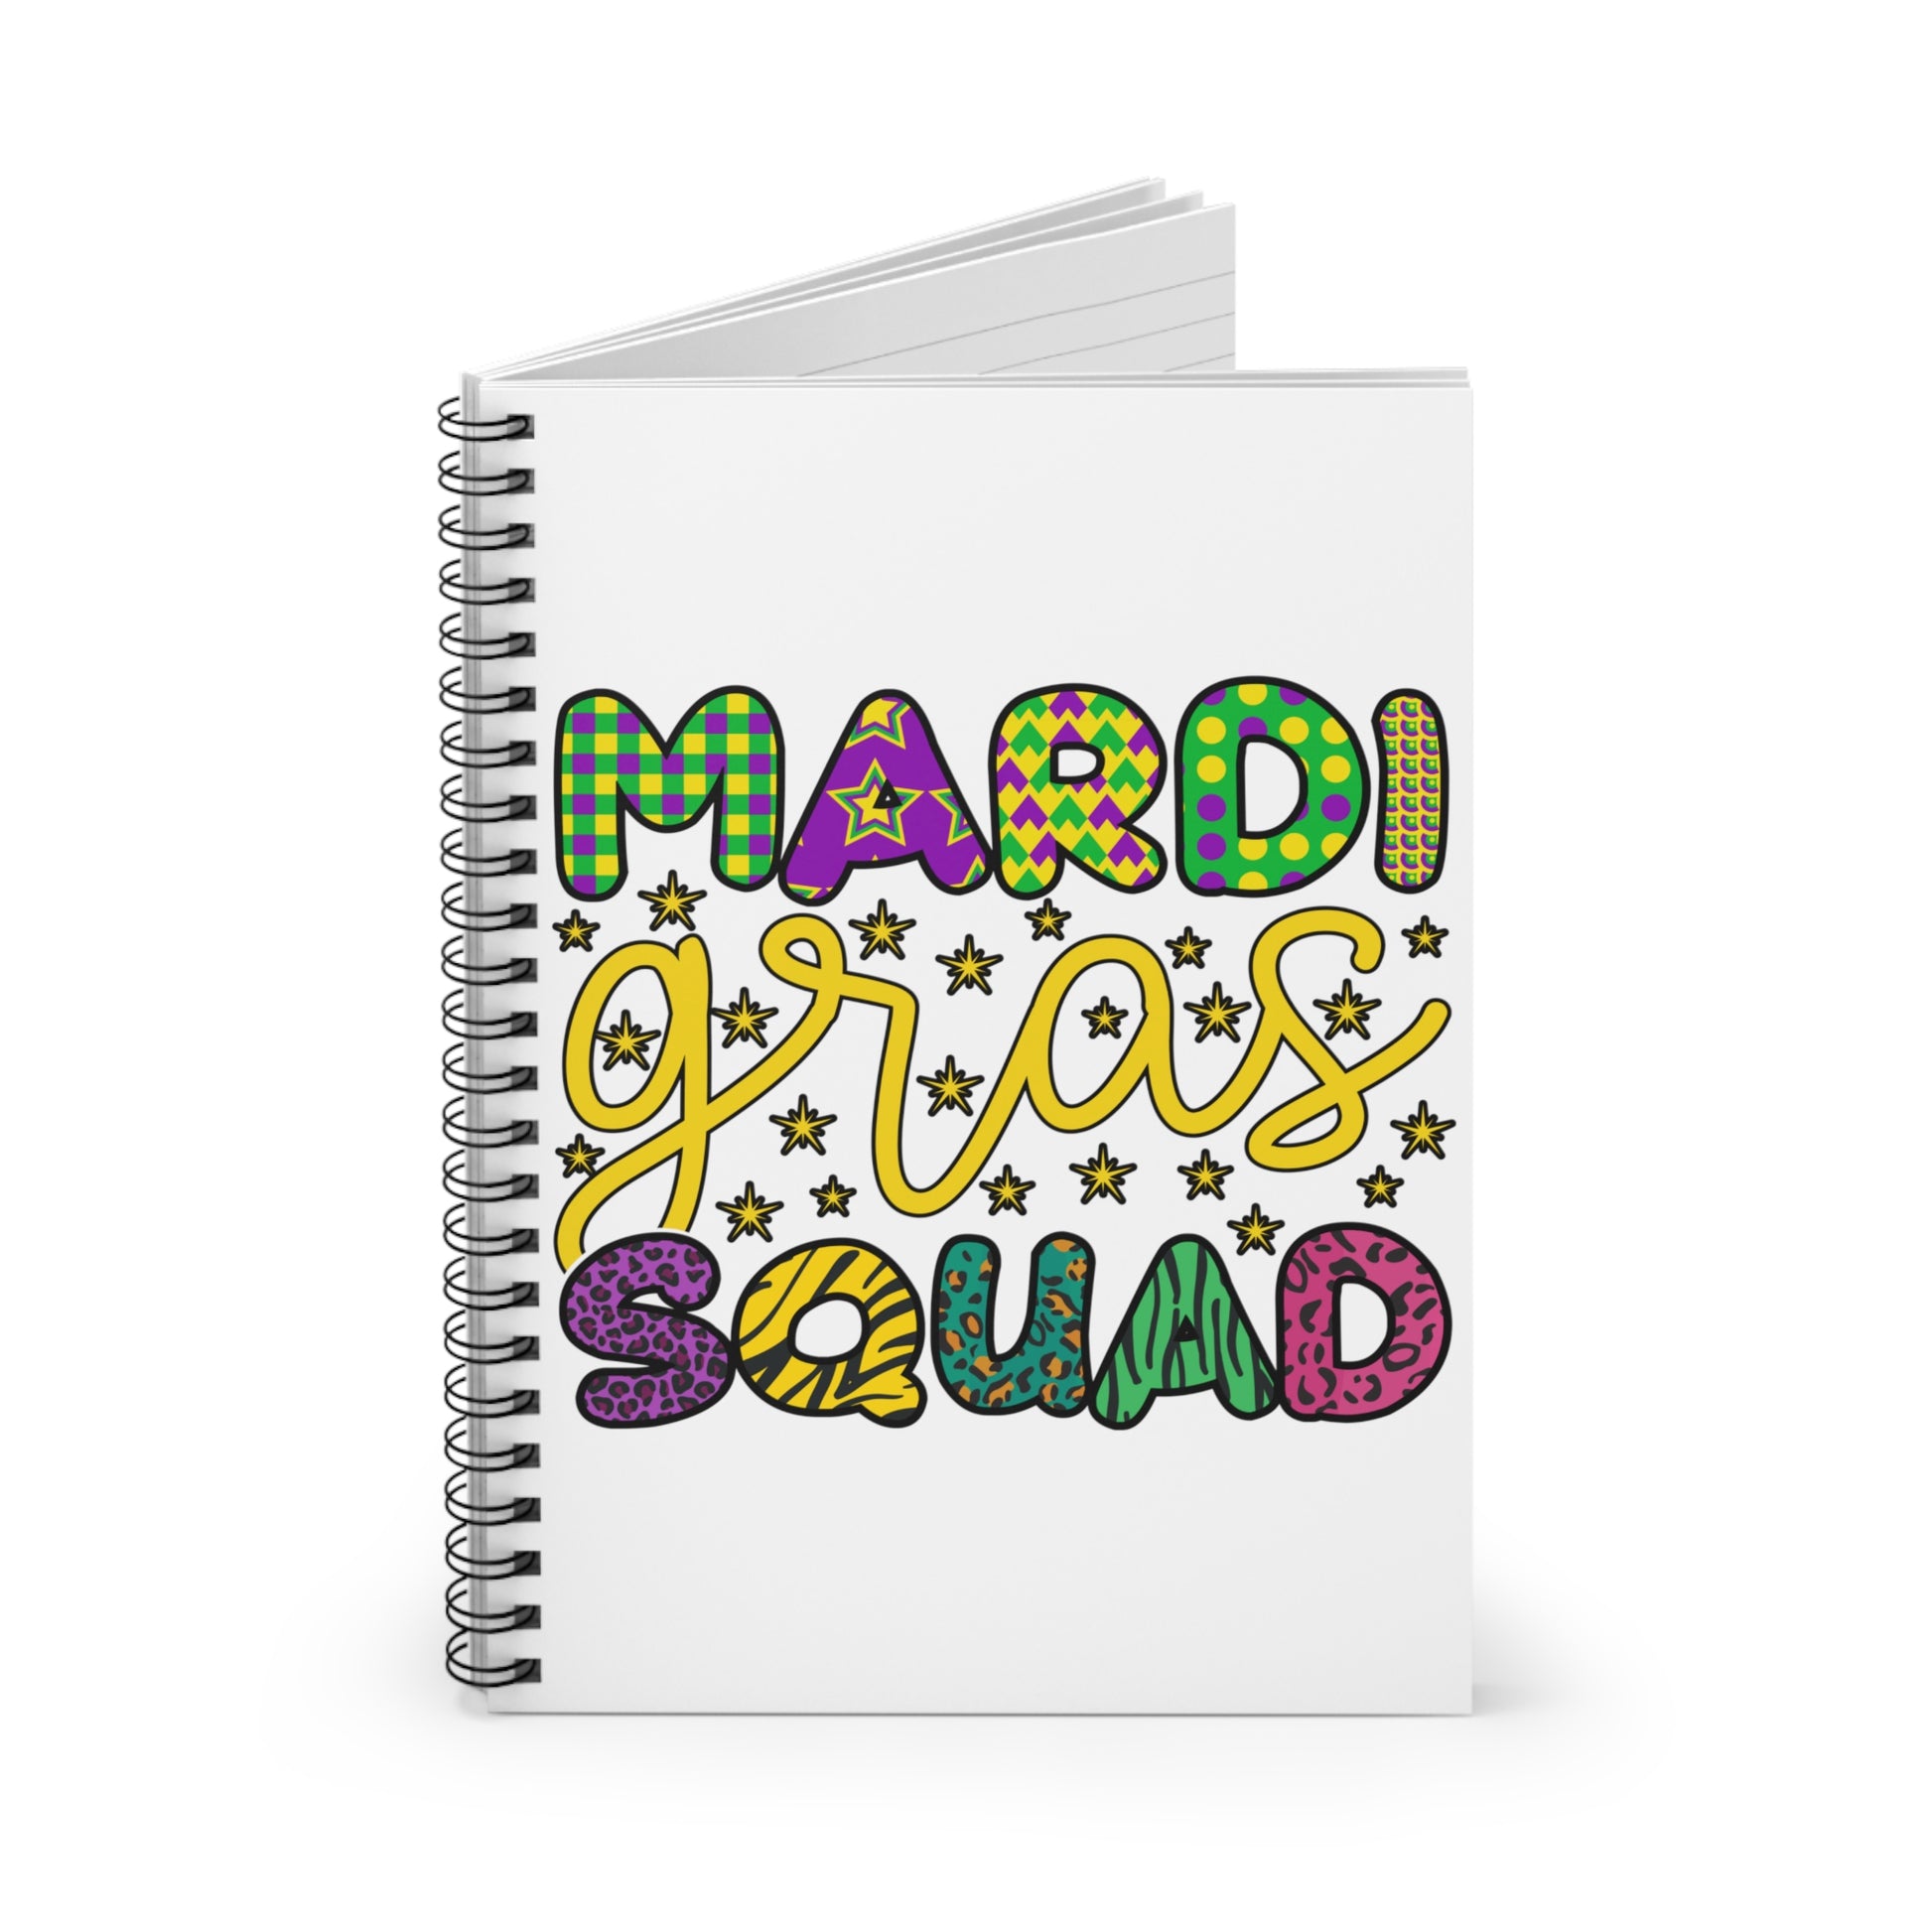 Mardi Gras Squad: Spiral Notebook - Log Books - Journals - Diaries - and More Custom Printed by TheGlassyLass